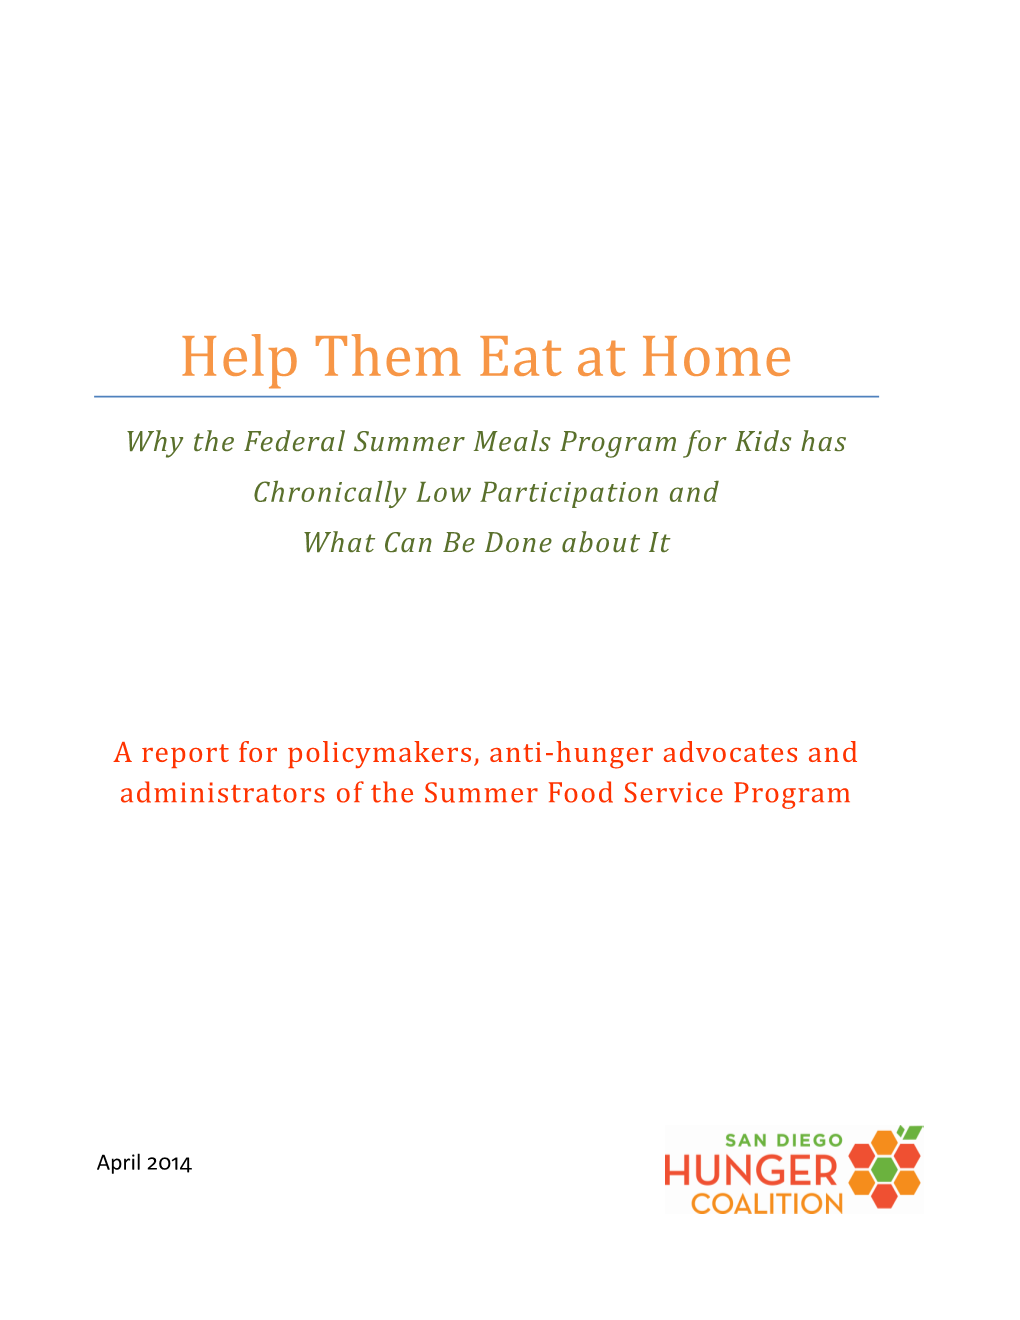 Help Them Eat at Home: Why the Federal Summer Meals Program for Kids Has Chronically Low Participation and What Can Be Done About It